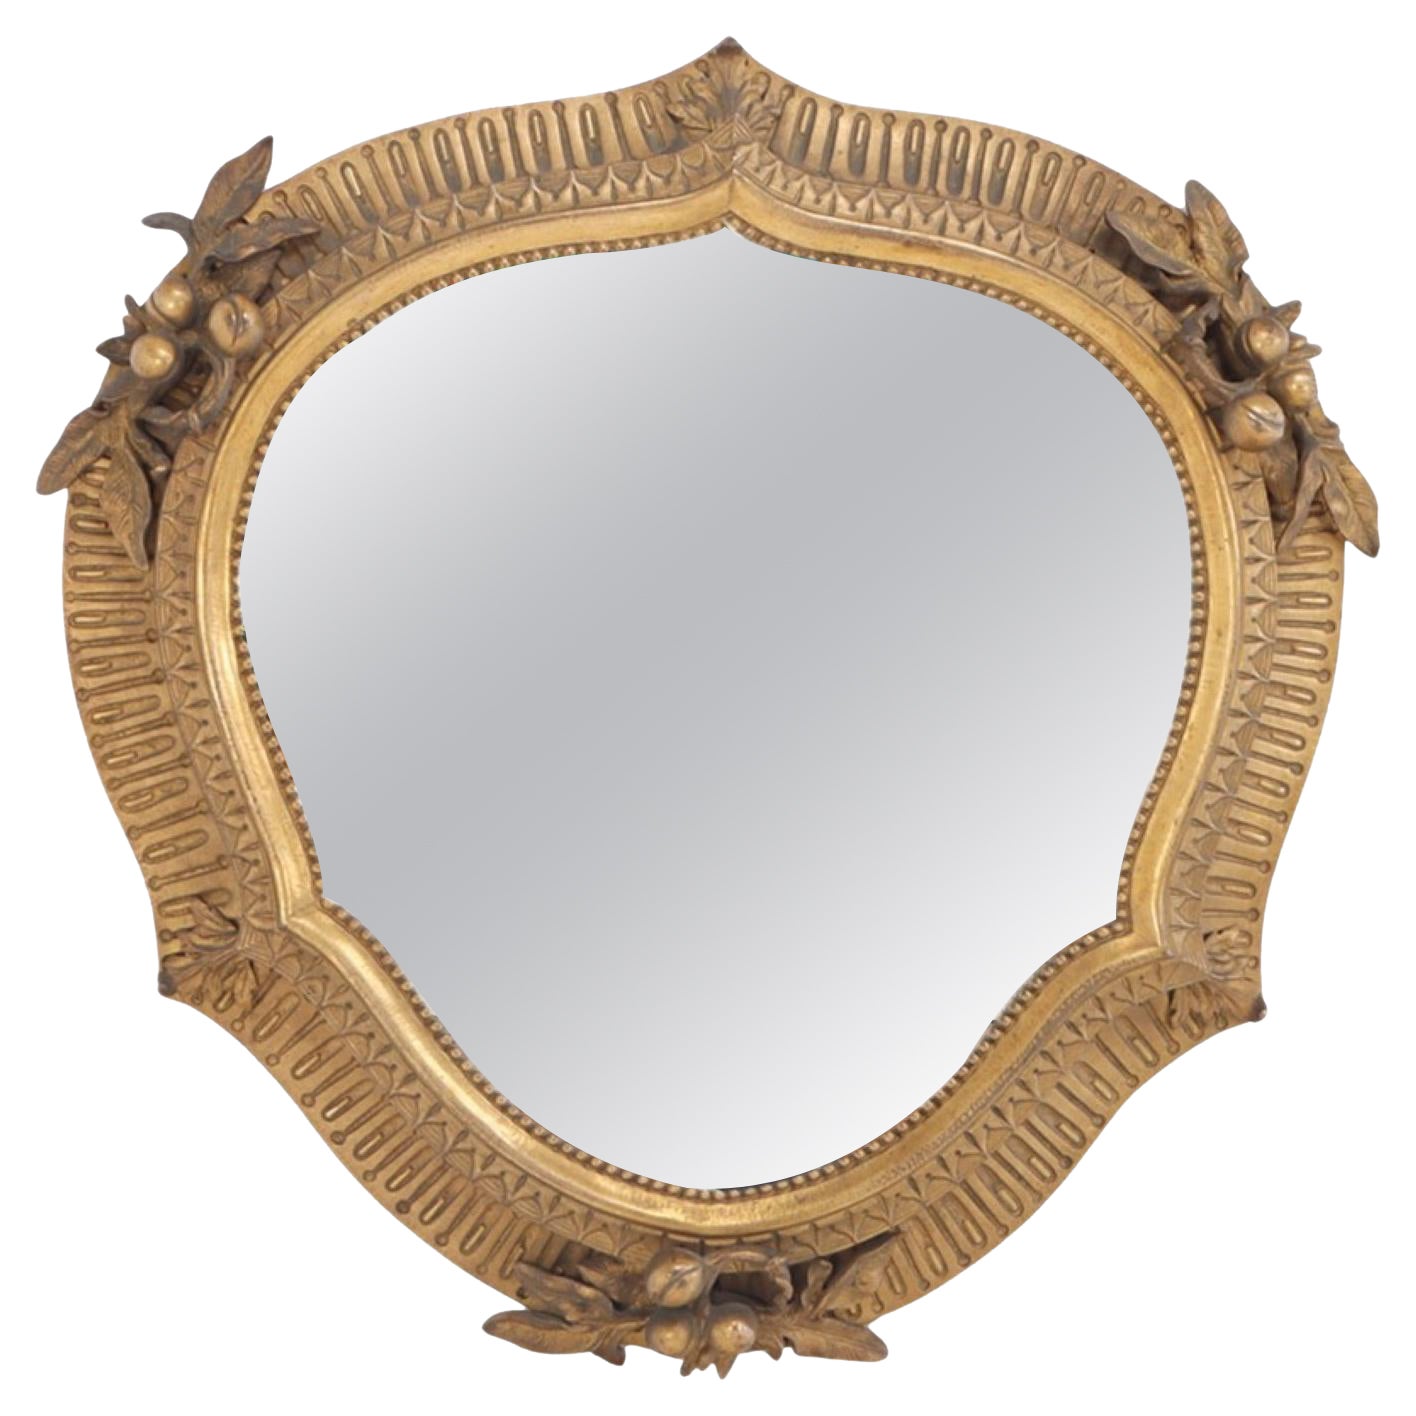 A quality cast bronze French wall mirror with nicely detailed border circa 1900.